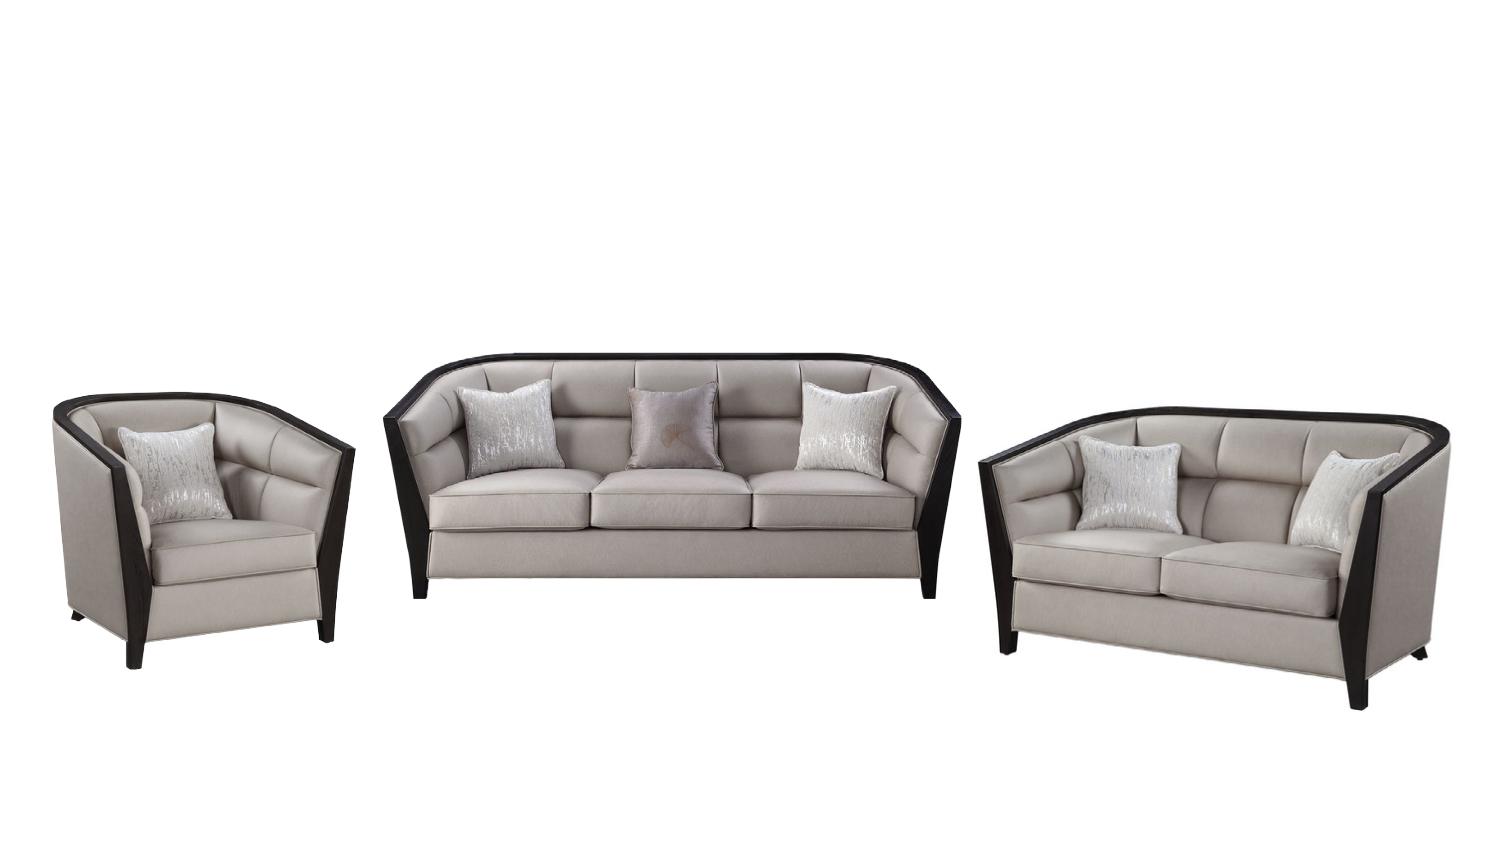 Contemporary, Classic Sofa Loveseat and Chair Set Zemocryss 54235-3pcs in Beige Fabric